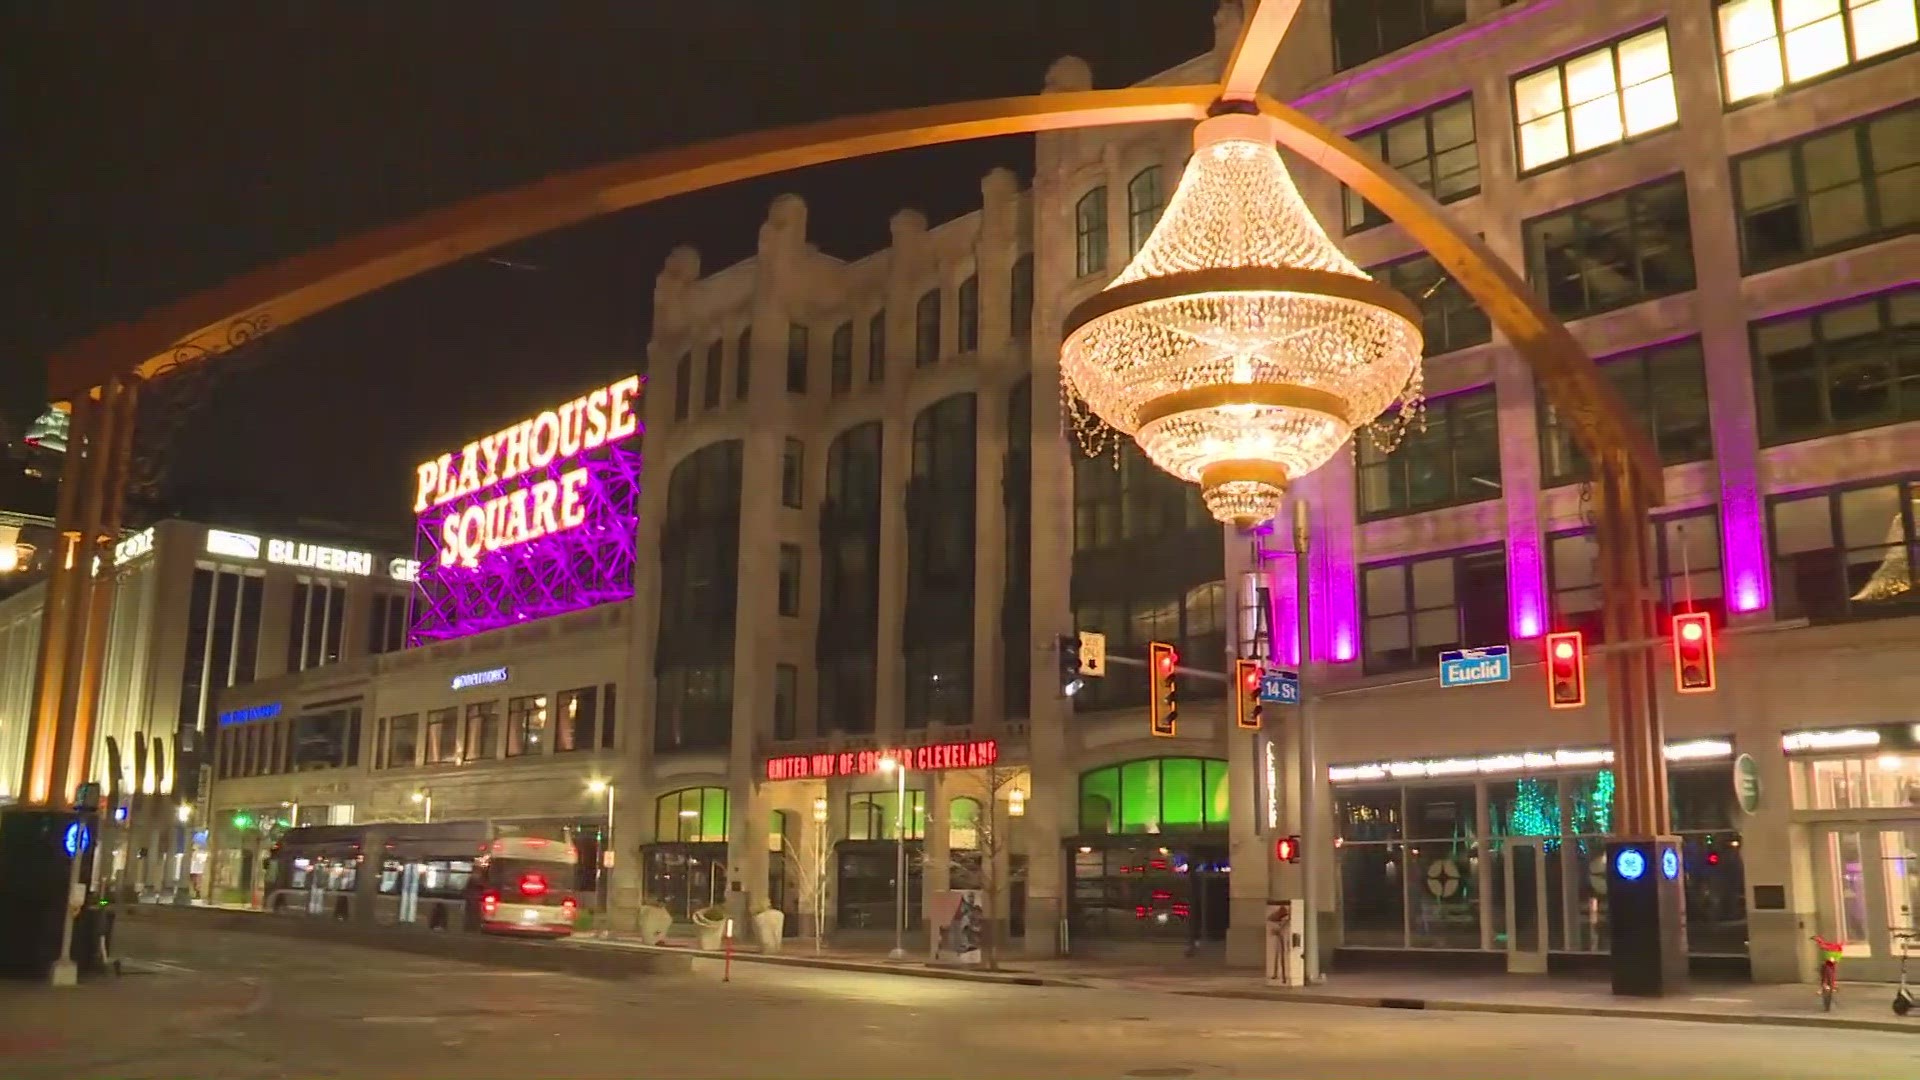 The 2023 Cleveland International Film Festival runs from March 22 through April 1.